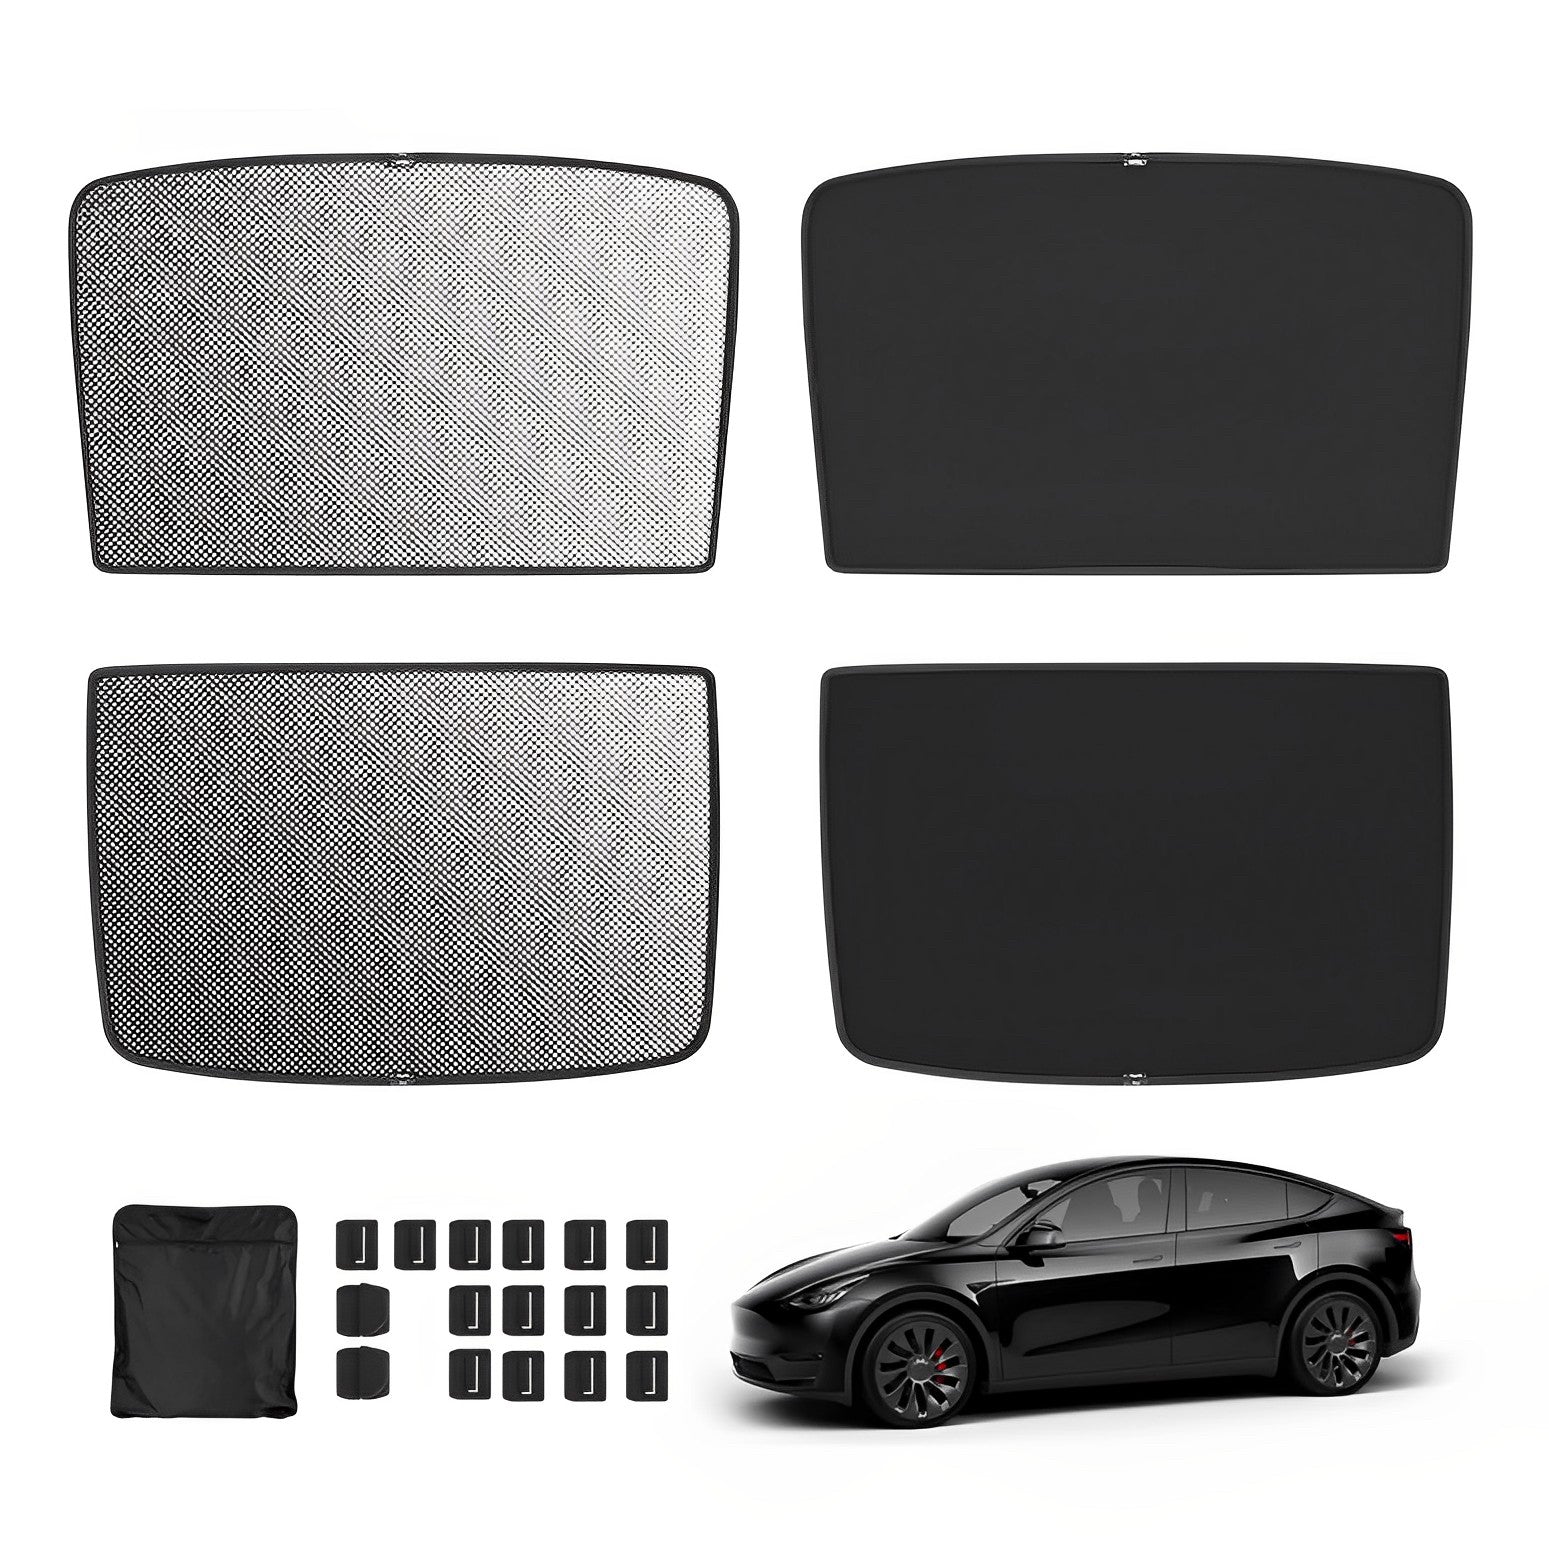 Upgrade Built-in Reflective Sunroof Sunshade for Model Y / Model 3 - Lightweight Reflective Silver Coated Sun Visor